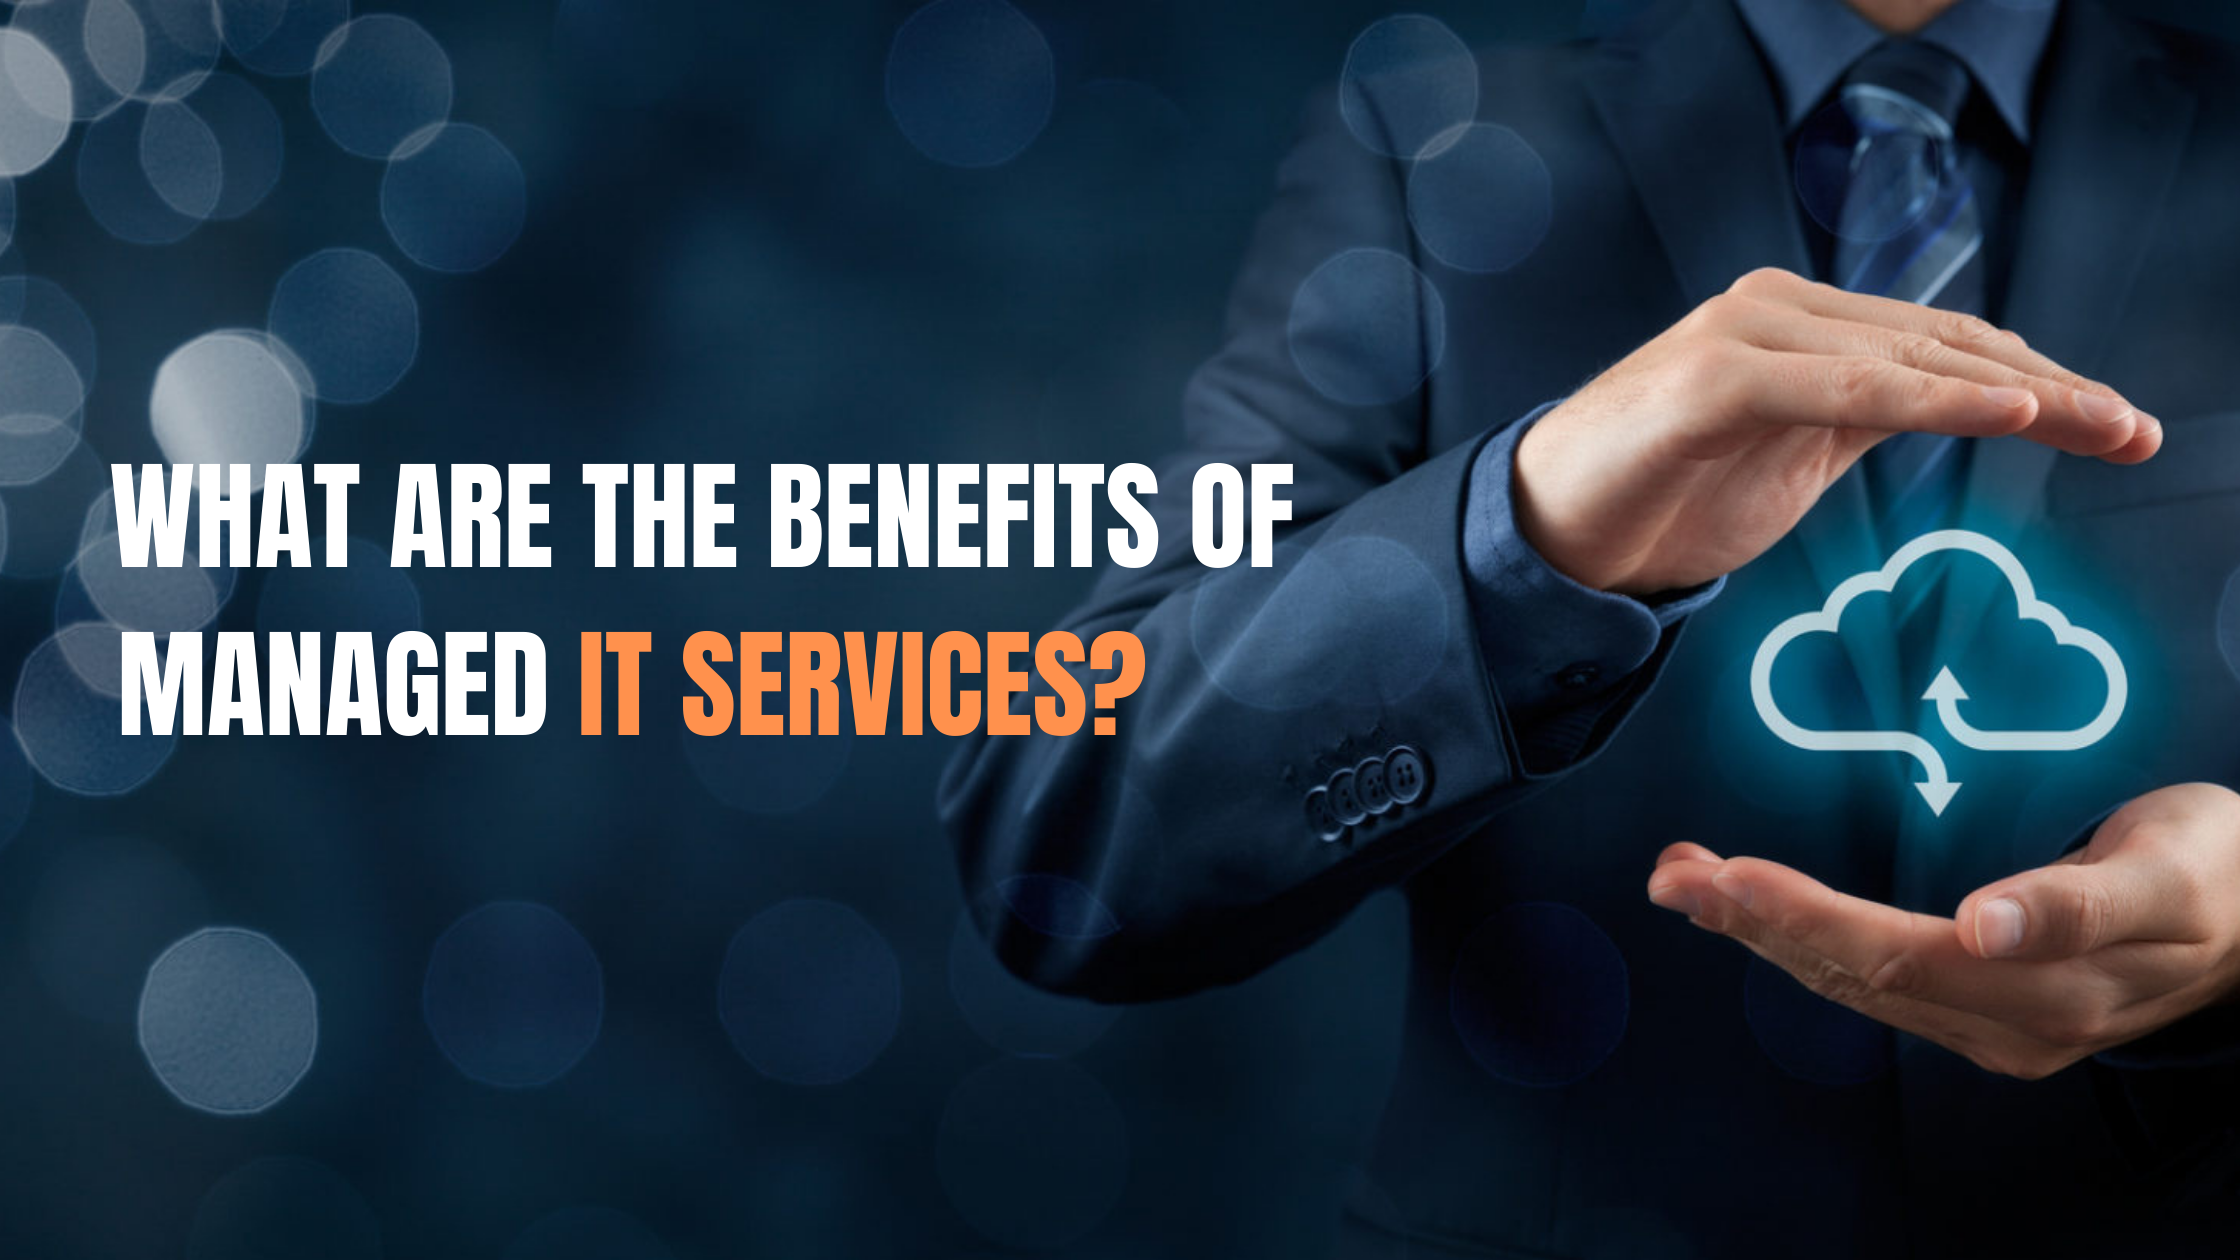 WHAT ARE THE BENEFITS OF MANAGED IT SERVICES?